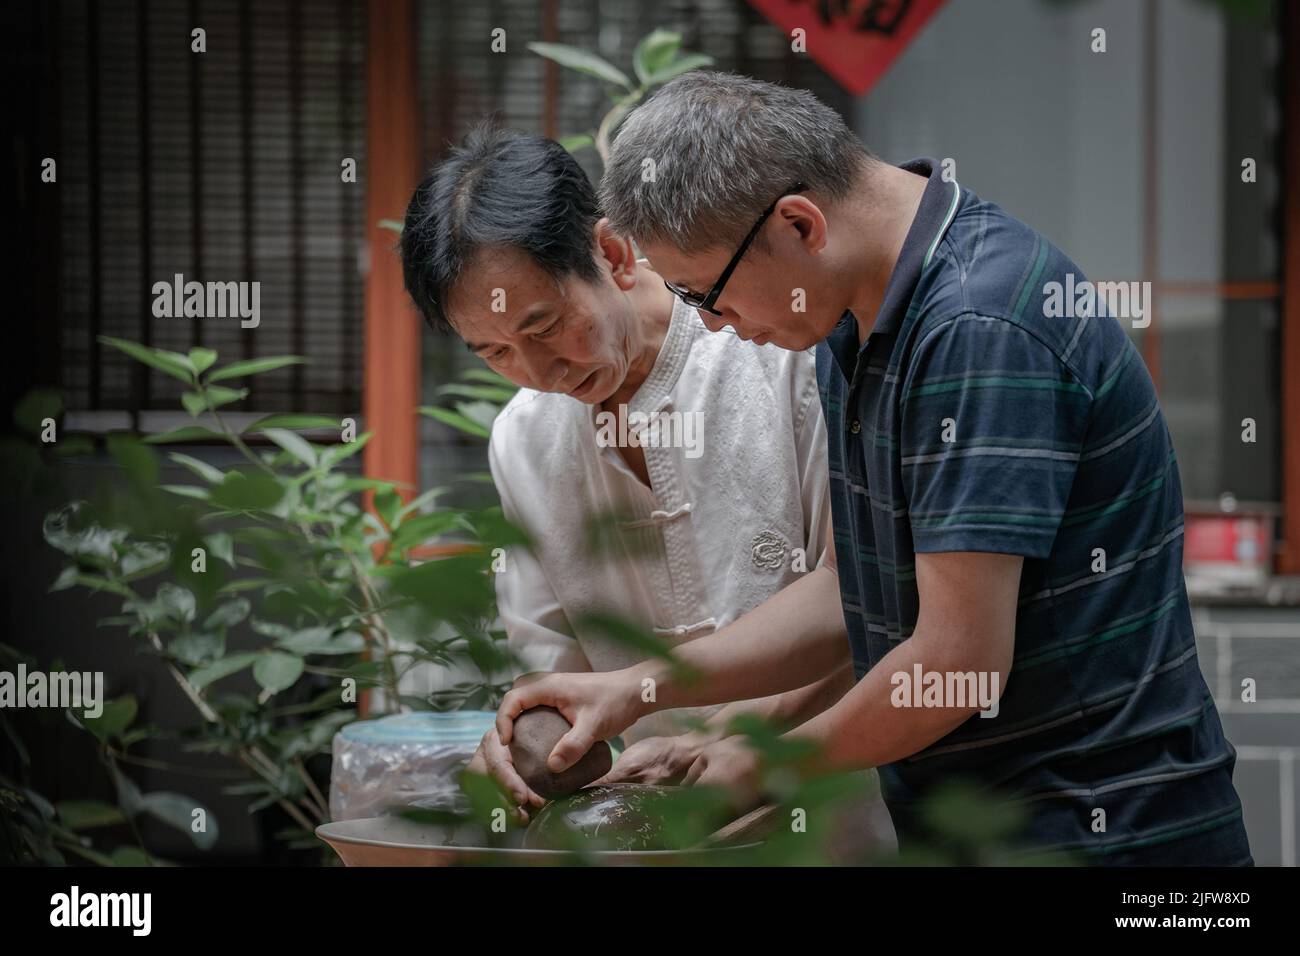 (220705) -- KUNMING, July 5, 2022 (Xinhua) -- Xu Ronghong (L), a Zitao (purple pottery) craftsman, teaches an apprentice to polish a pottery ware in Wanyao Village of Jianshui County, Honghe Hani and Yi Autonomous Prefecture, southwest China's Yunnan Province, June 30, 2022. Xu Ronghong, 57, is an inheritor of the making skills of Jianshui purple pottery, one of the national intangible cultural heritages of China. Xu was born in Jianshui County. As the fifth generation pottery maker of his family, Xu started to learn the techniques since childhood. In order to make an excellent piece of p Stock Photo